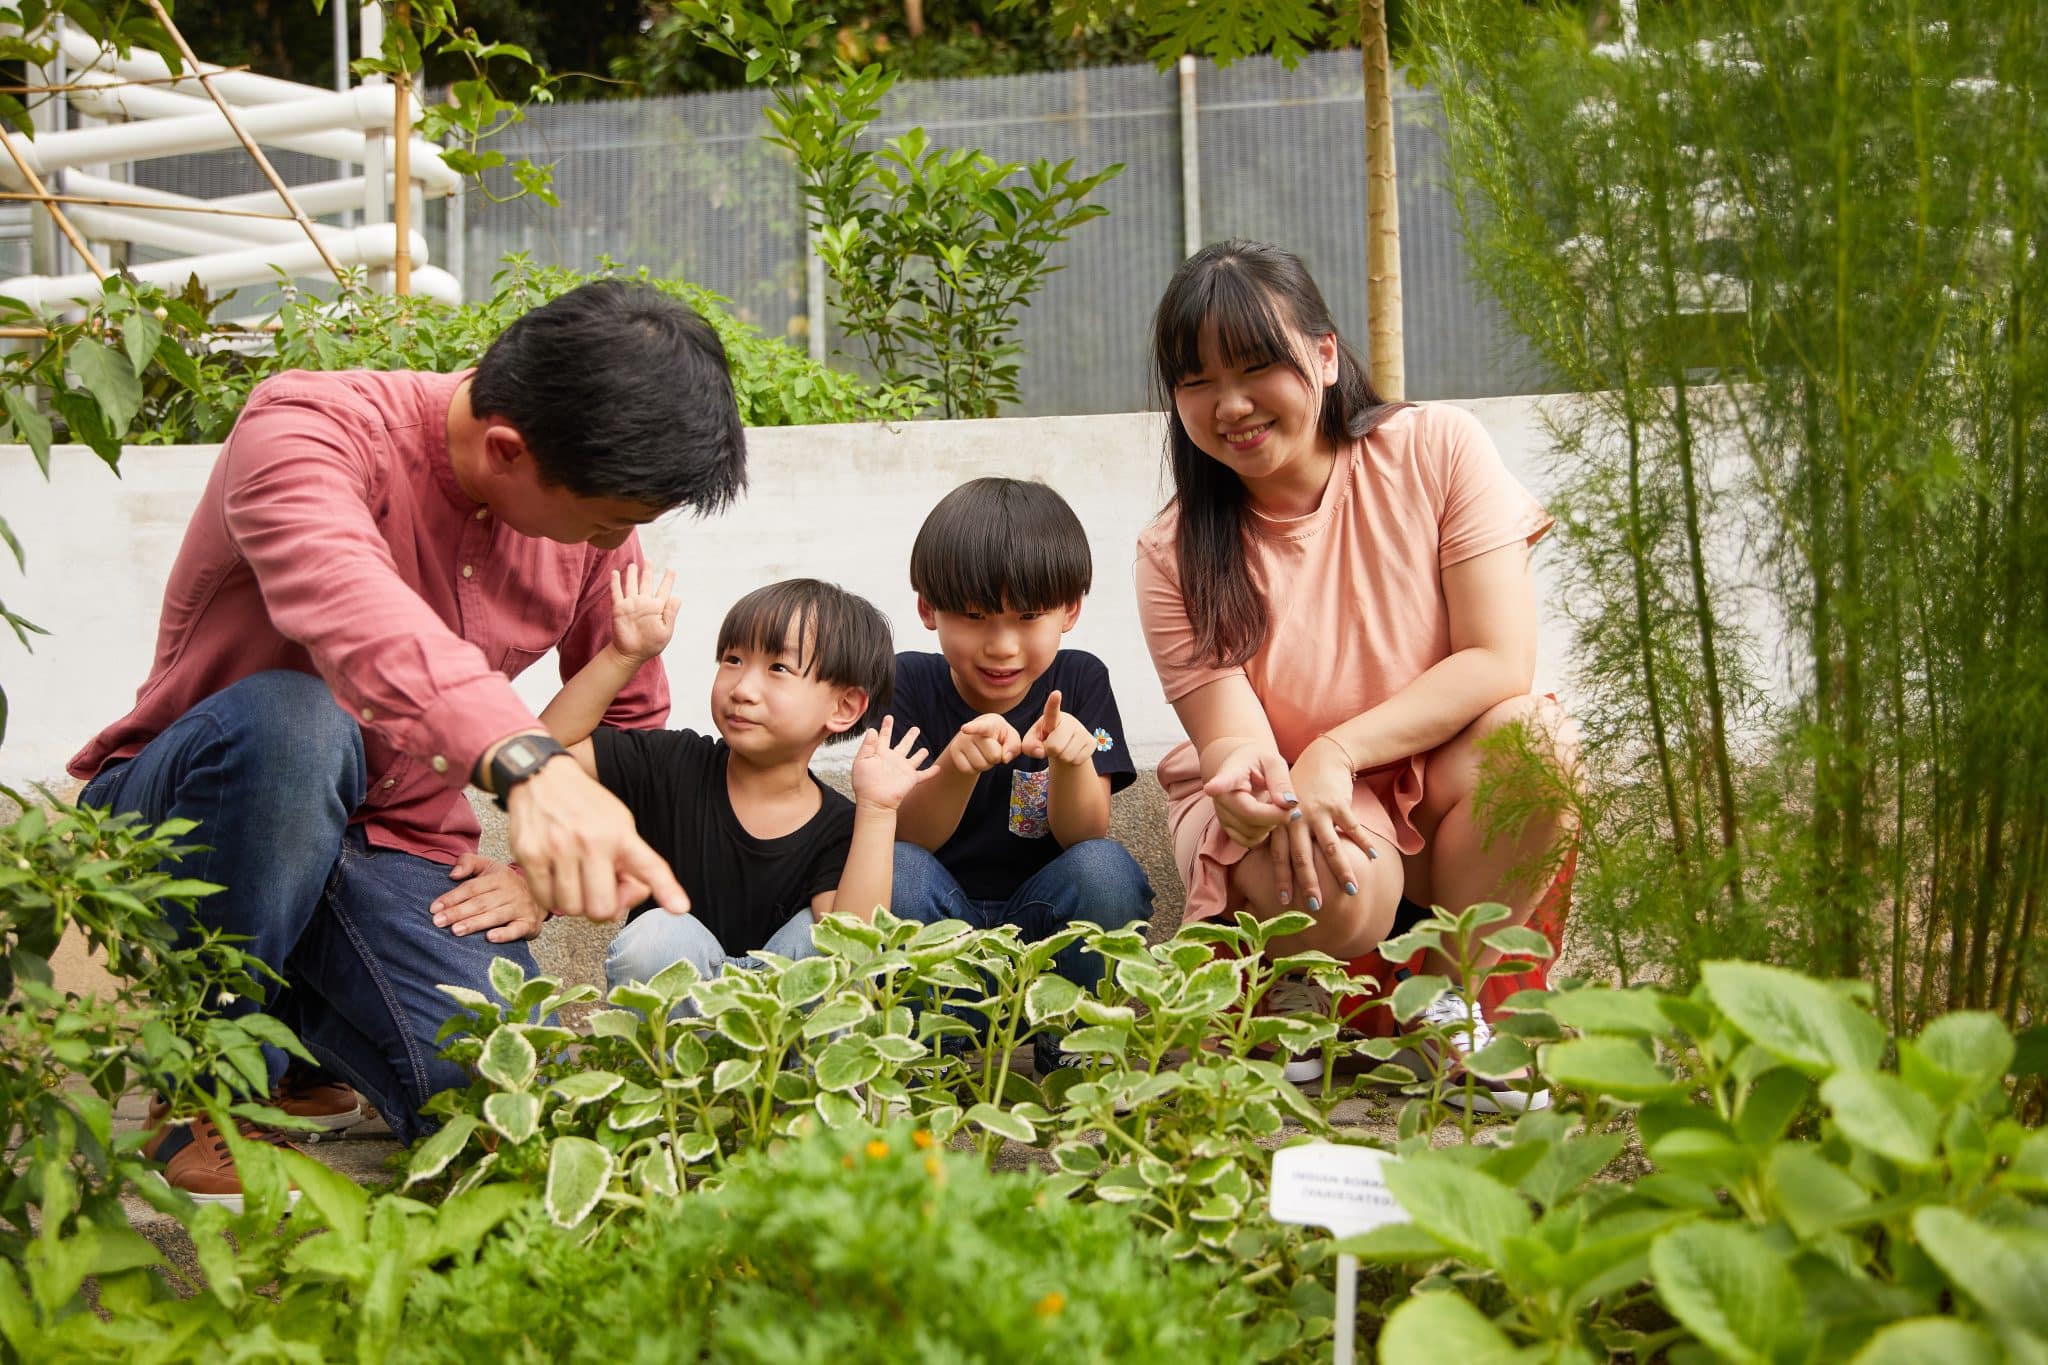 Learn how to live greener and explore the benefits of urban farming.